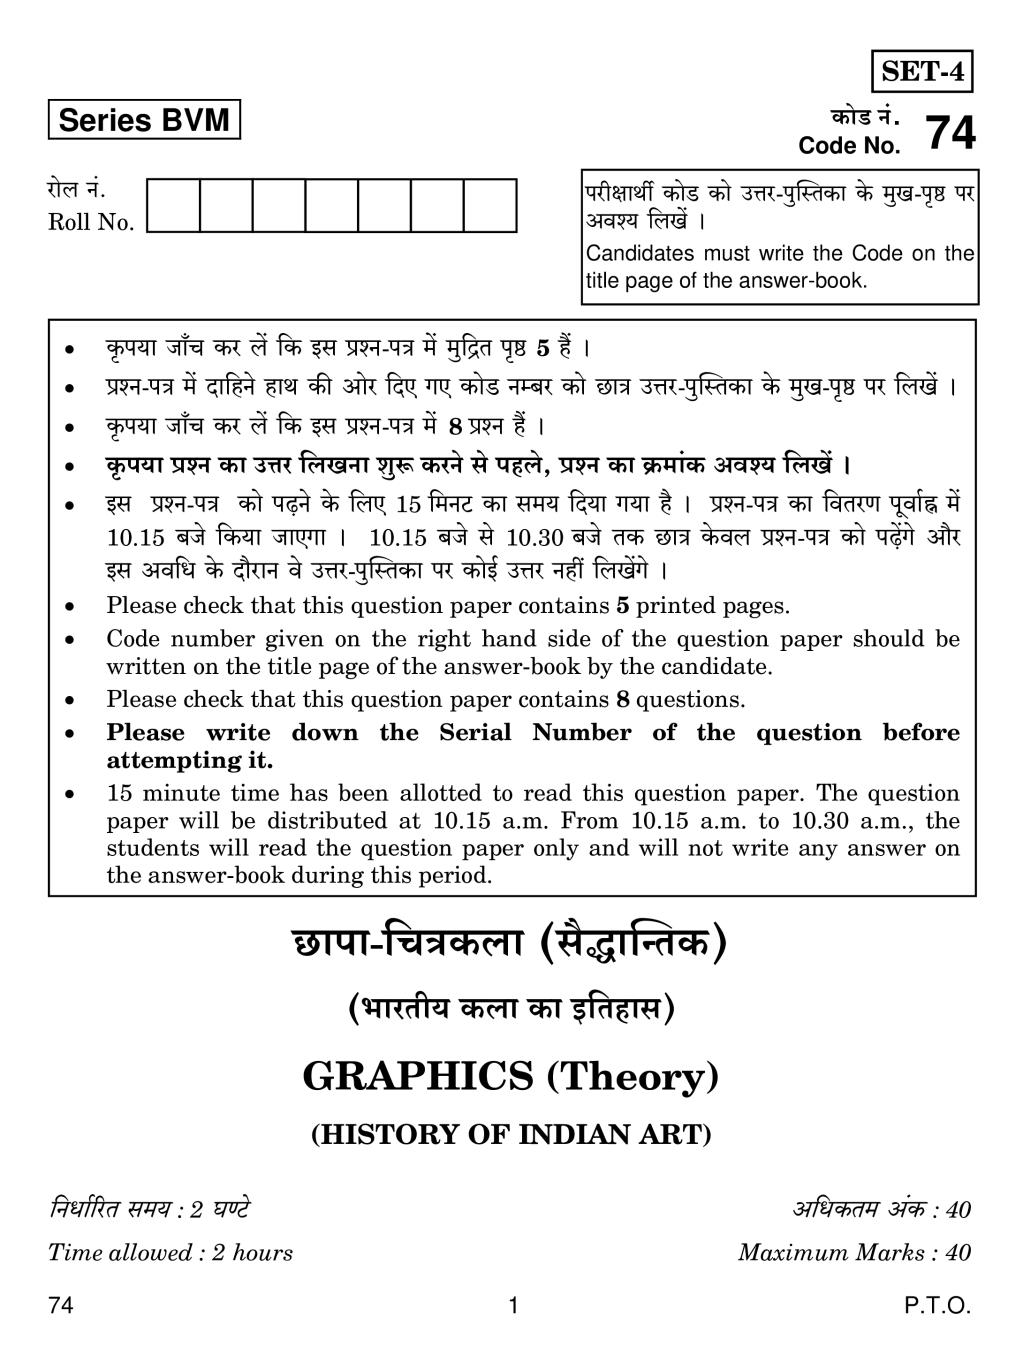 CBSE Class 12 Graphics Question Paper 2019 - Page 1